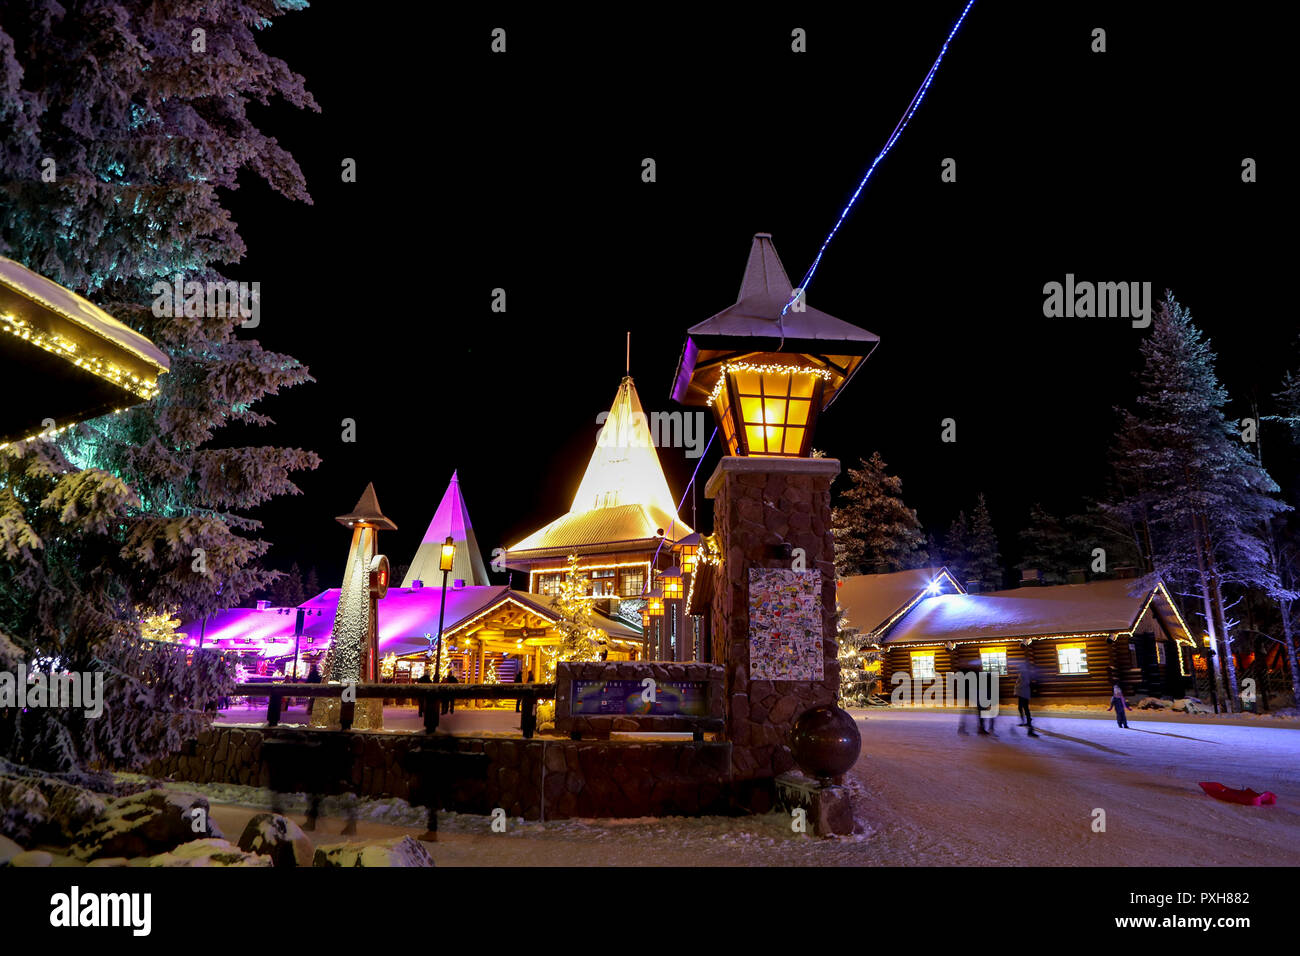 A view of the Santa Claus Village, in Rovaniemi, Finland. Rovaniemi is the  provincial capital of Finnish Lapland and is situated on the Arctic Circle,  it is also the official hometown of